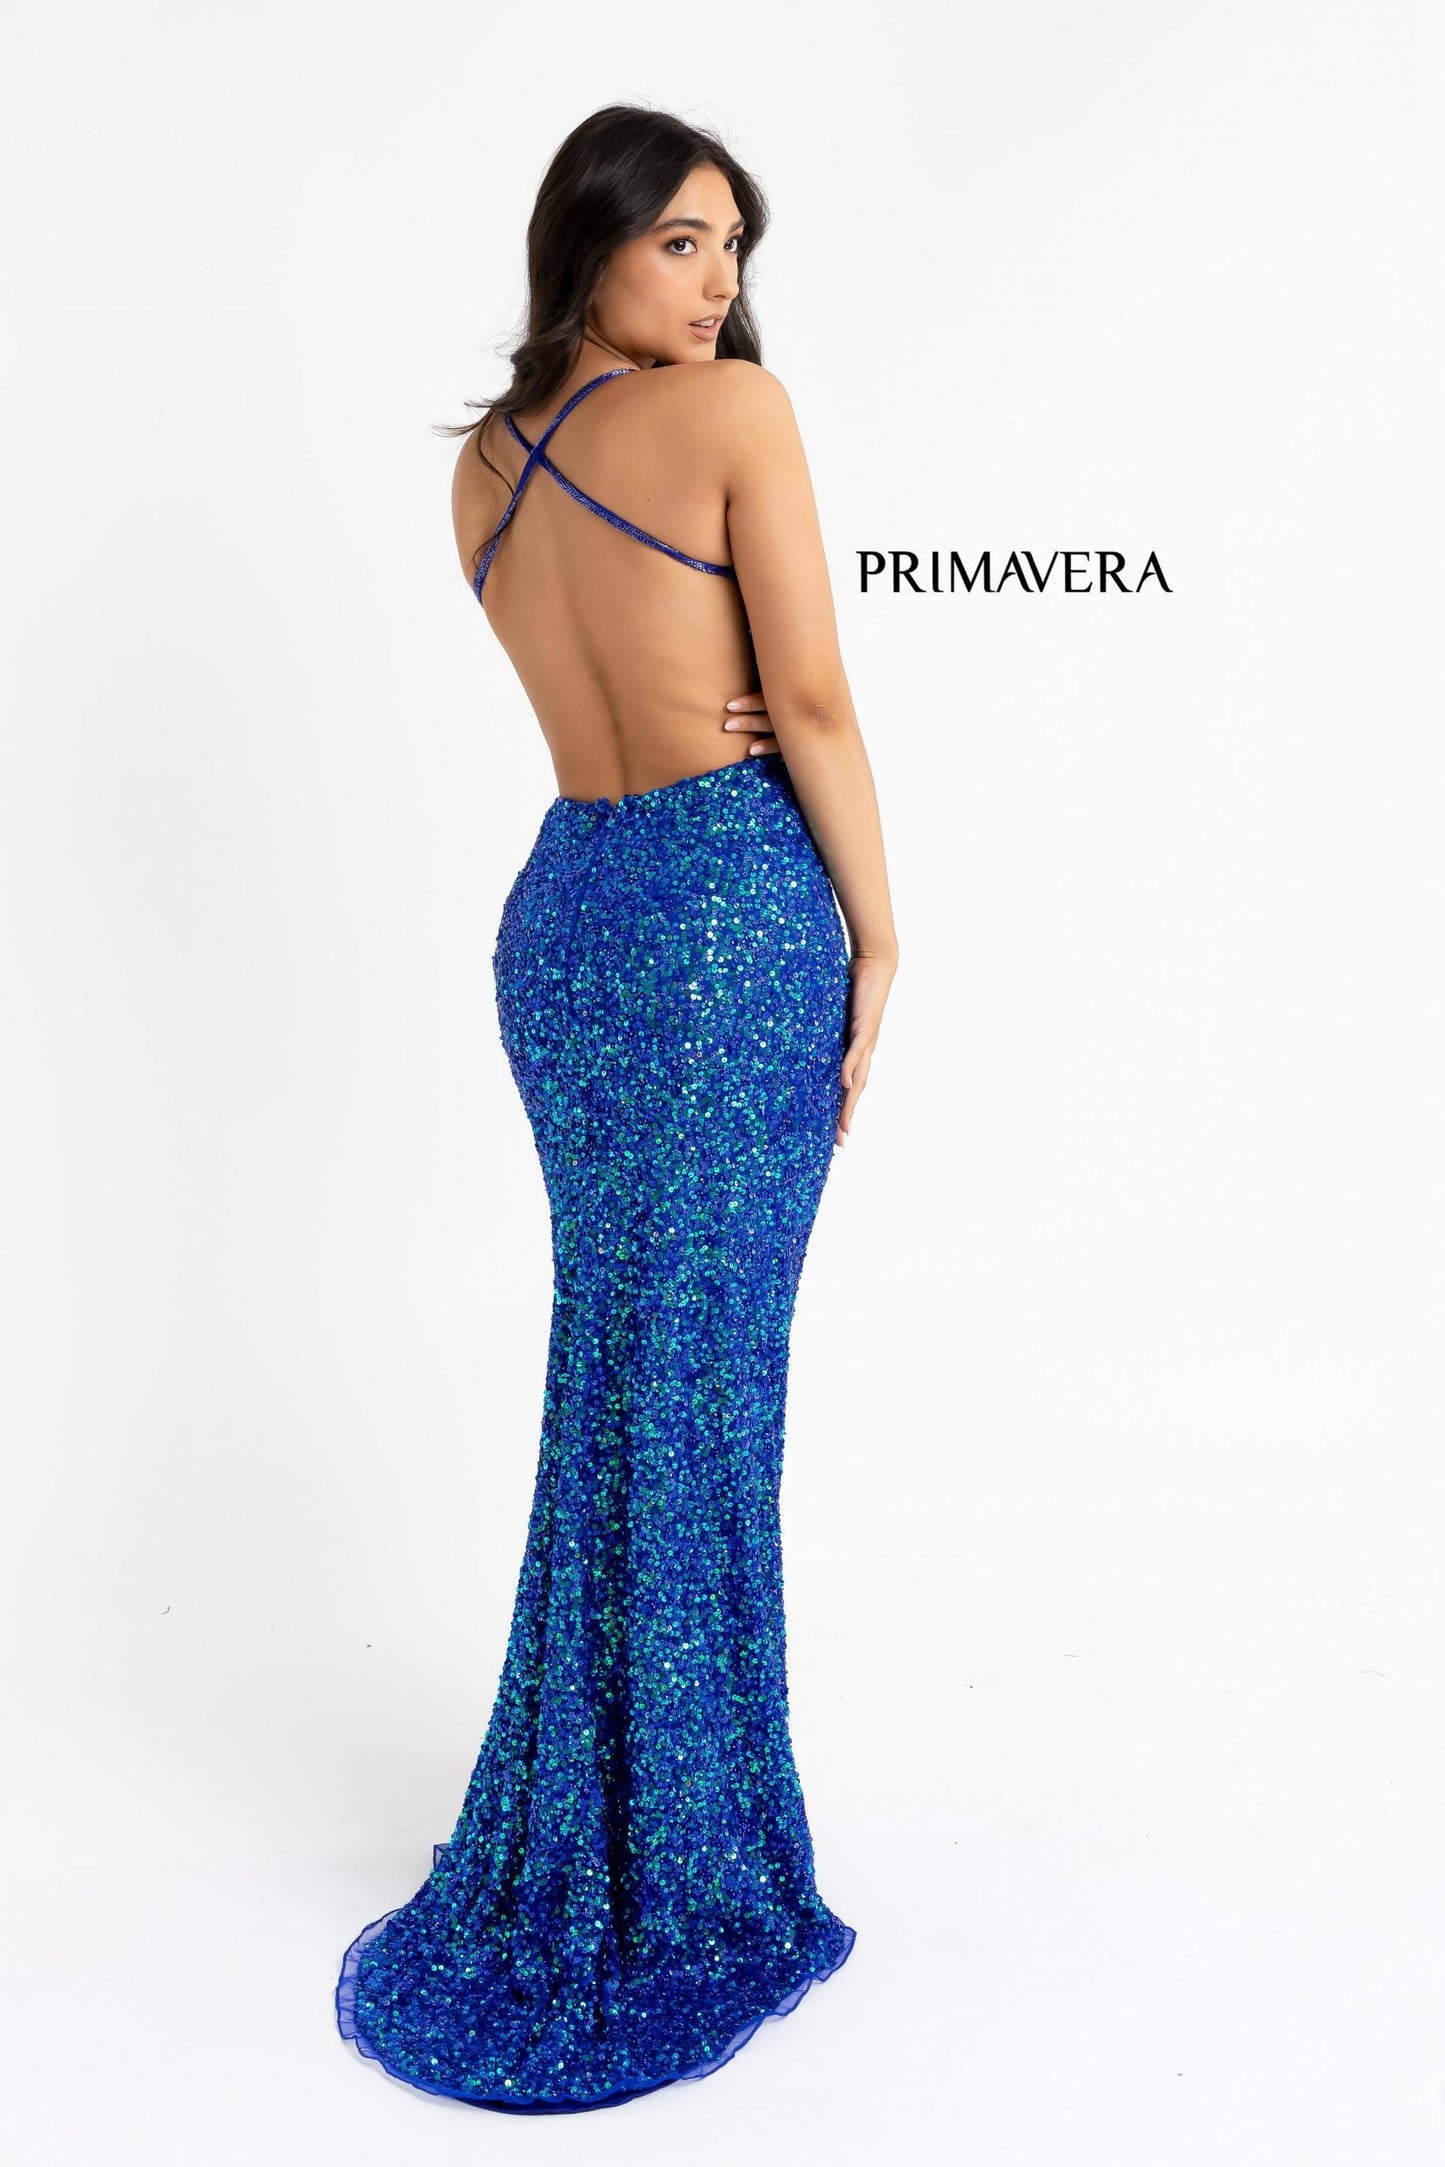 Primavera Couture 3291 Size 6 Neon Lilac Long Fitted Backless Sequin Prom Dress Formal Evening Gown